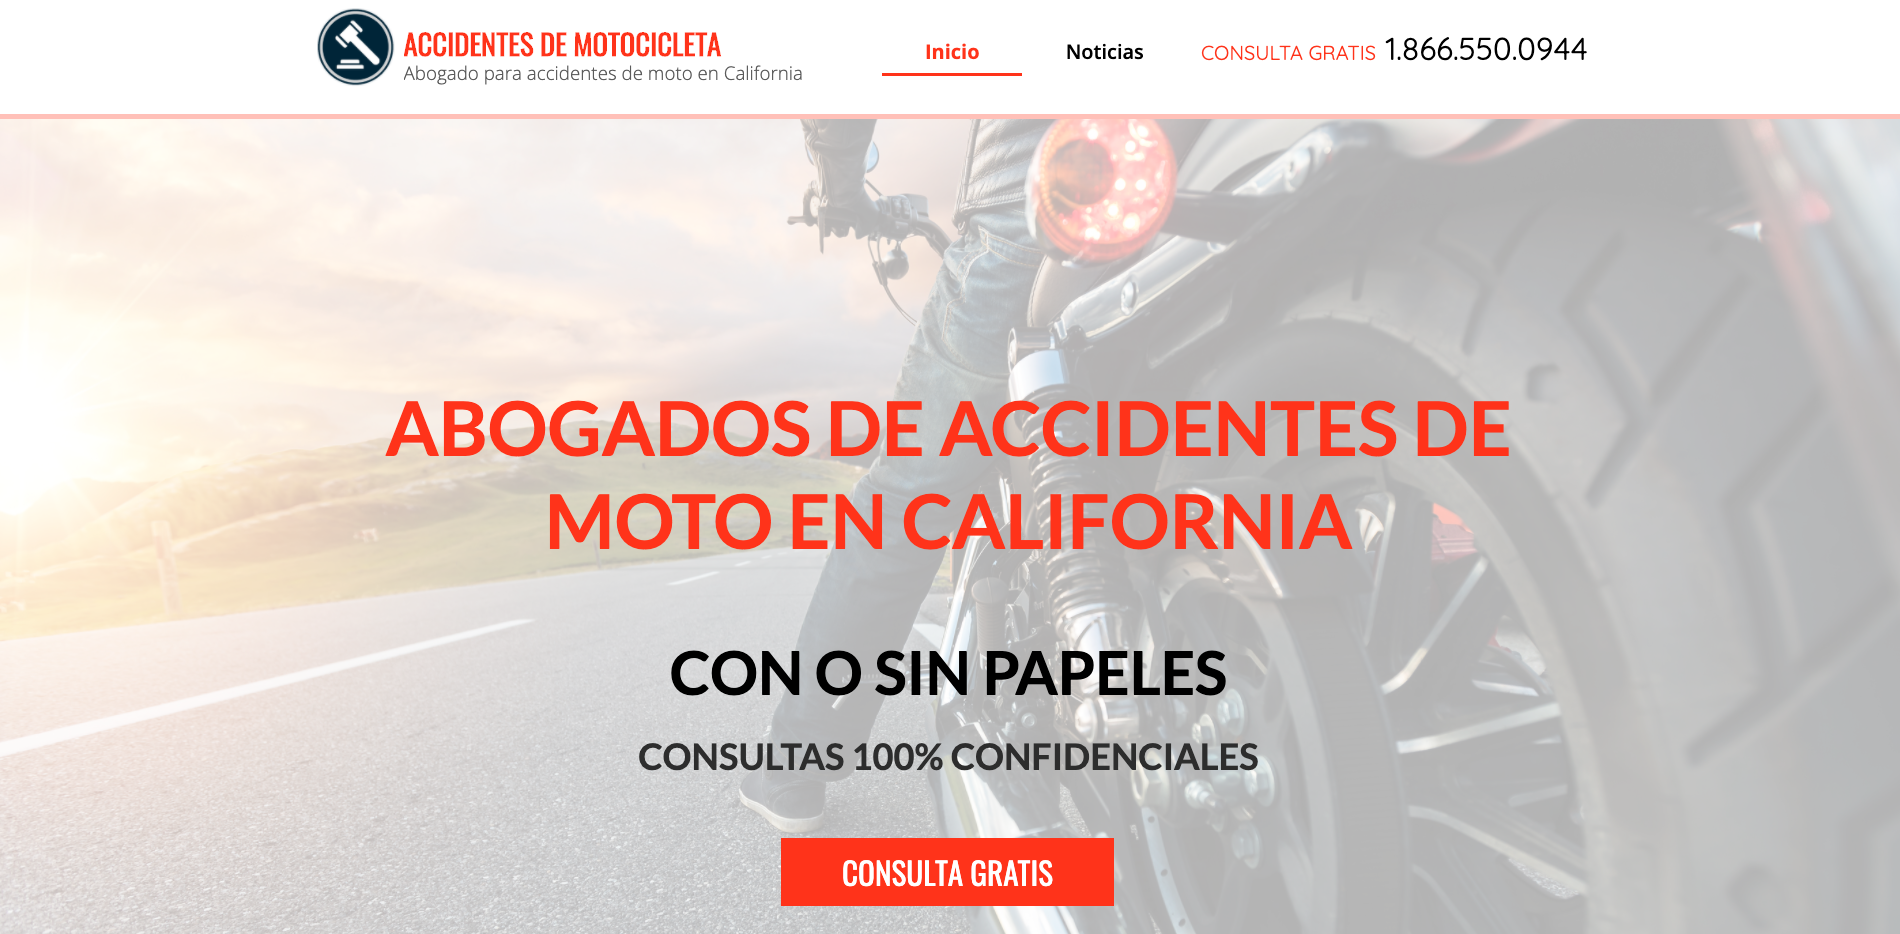 Spanish website for motorcycle accident lawyers